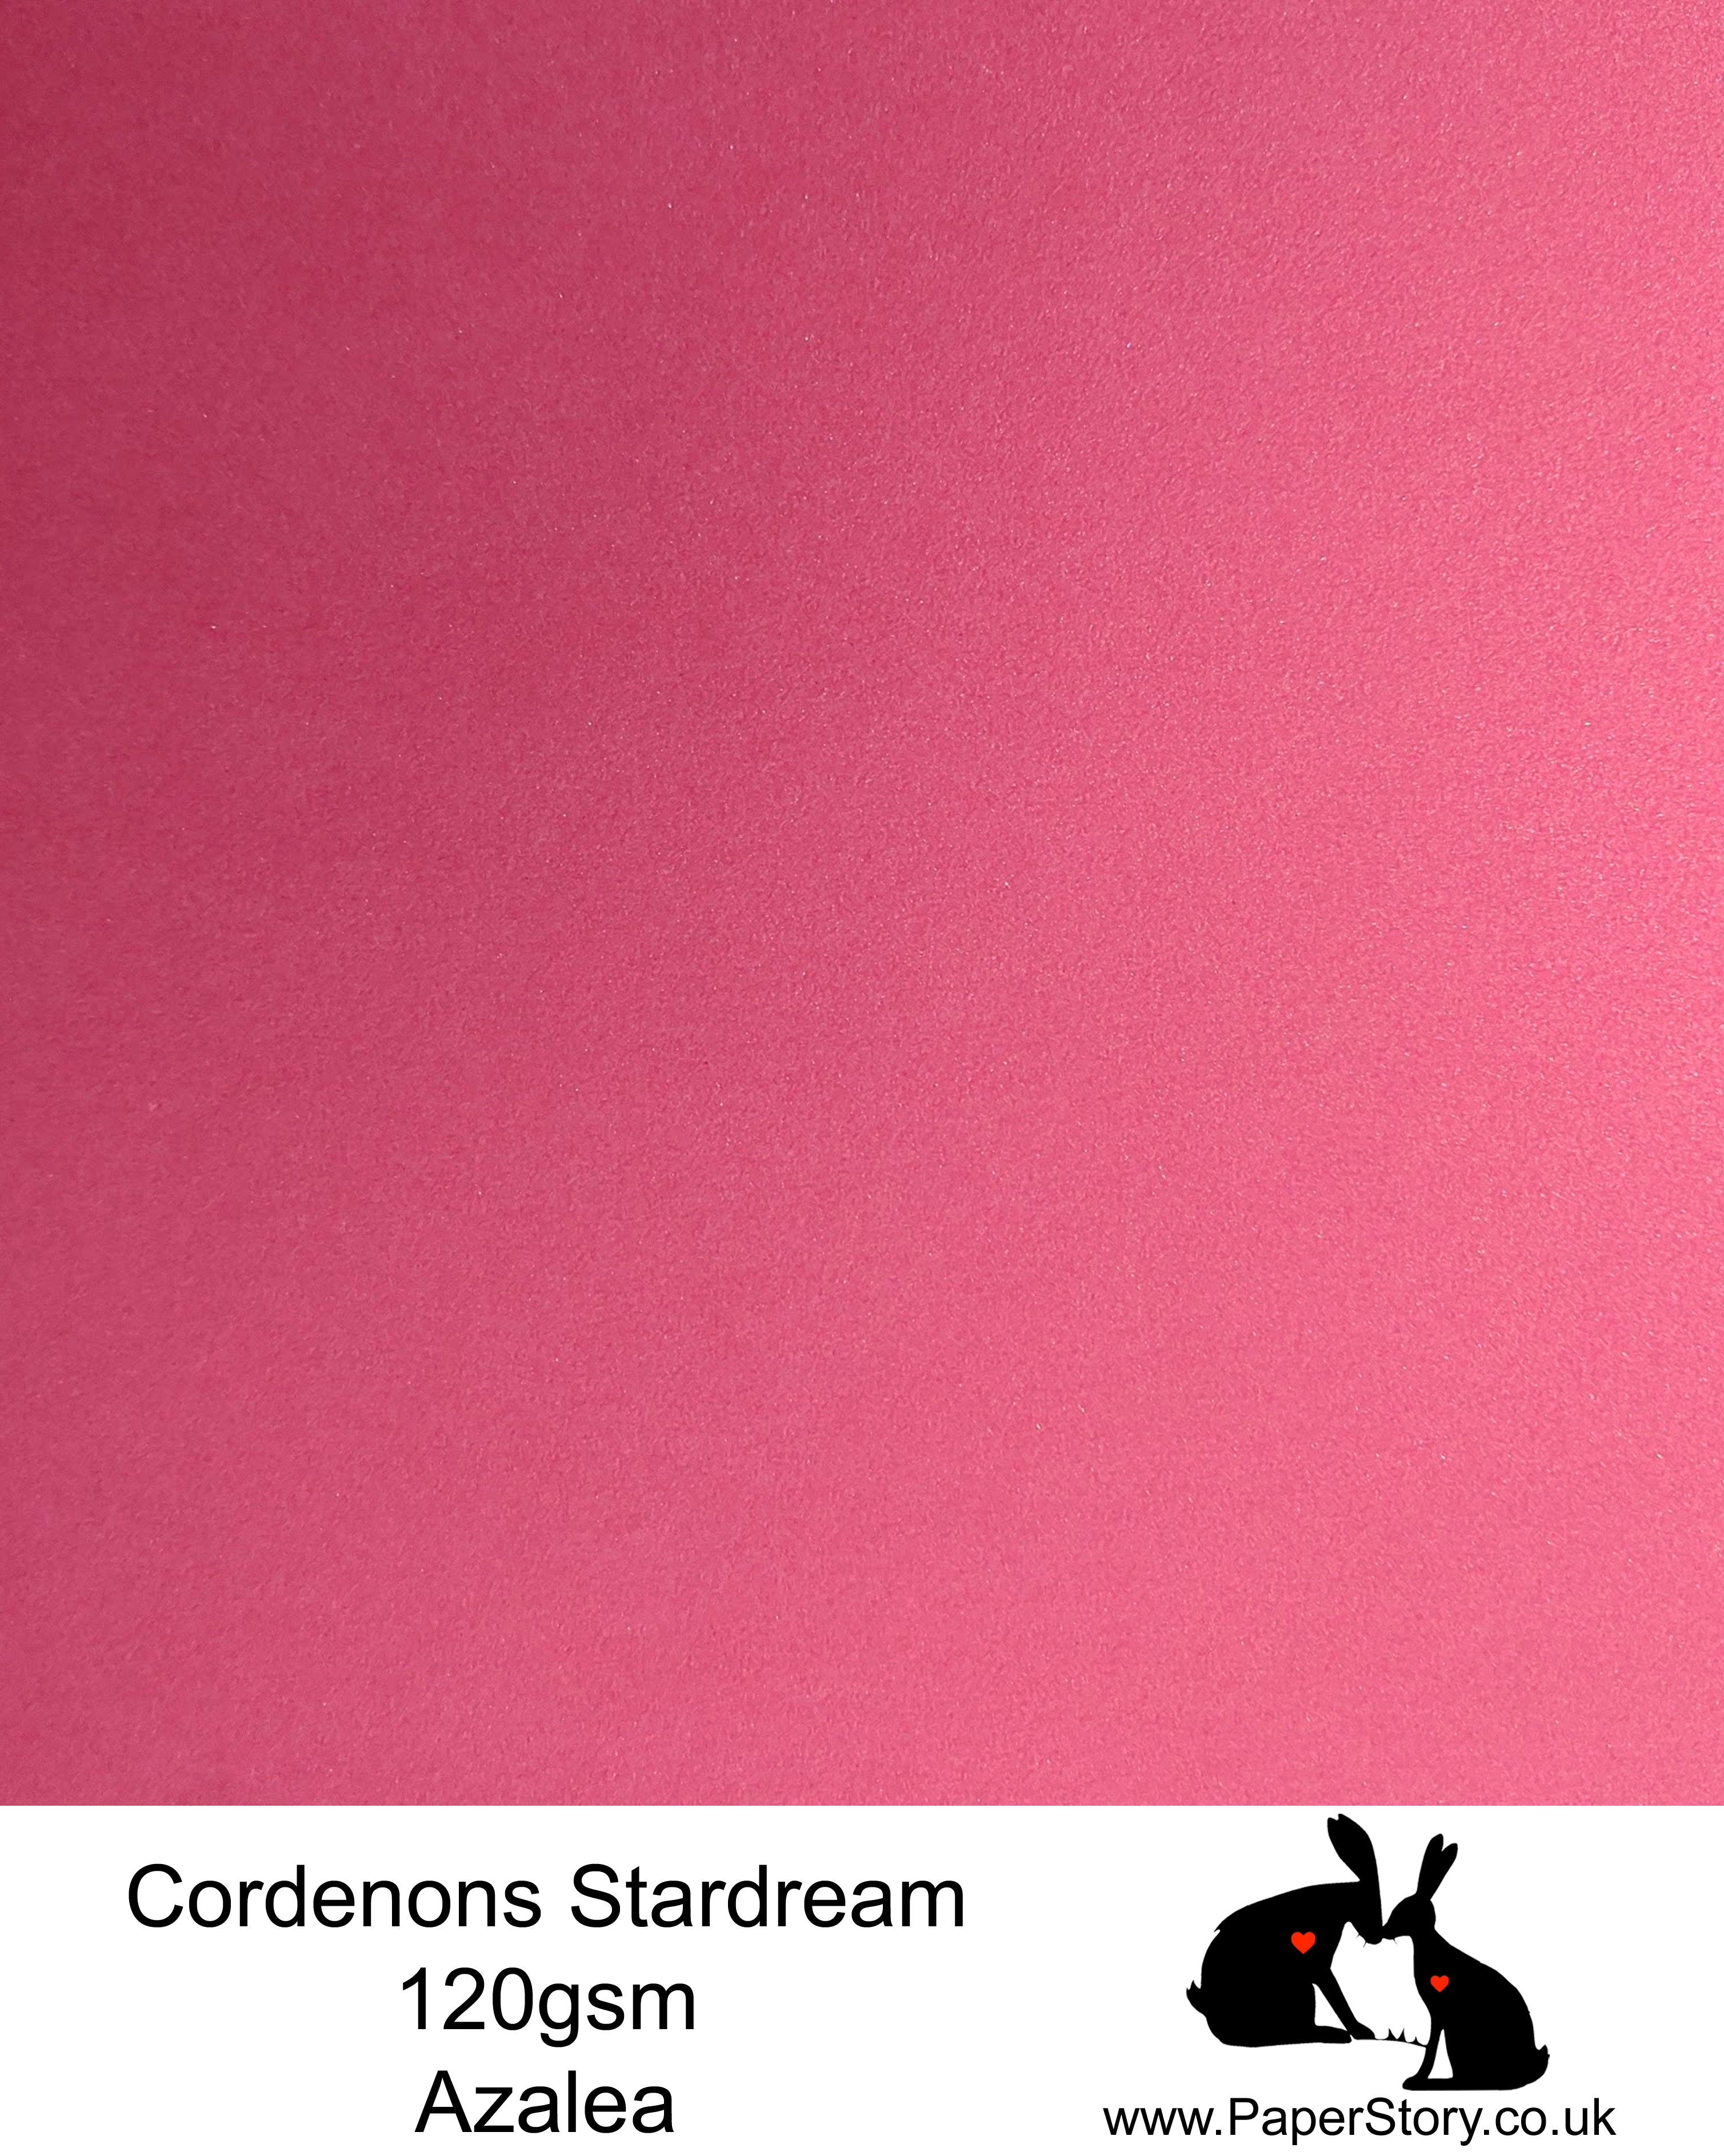 A4 Stardream 120gsm paper for Papercutting, craft, flower making  and wedding stationery. Azalea, is a punchy pink a vibrant floral, perfect for flowers of wedding stationary. Stardream is a luxury Italian paper from Italy, it is a double sided quality Pearlescent paper with a matching colour core. FSC Certified, acid free, archival and PH Neutral